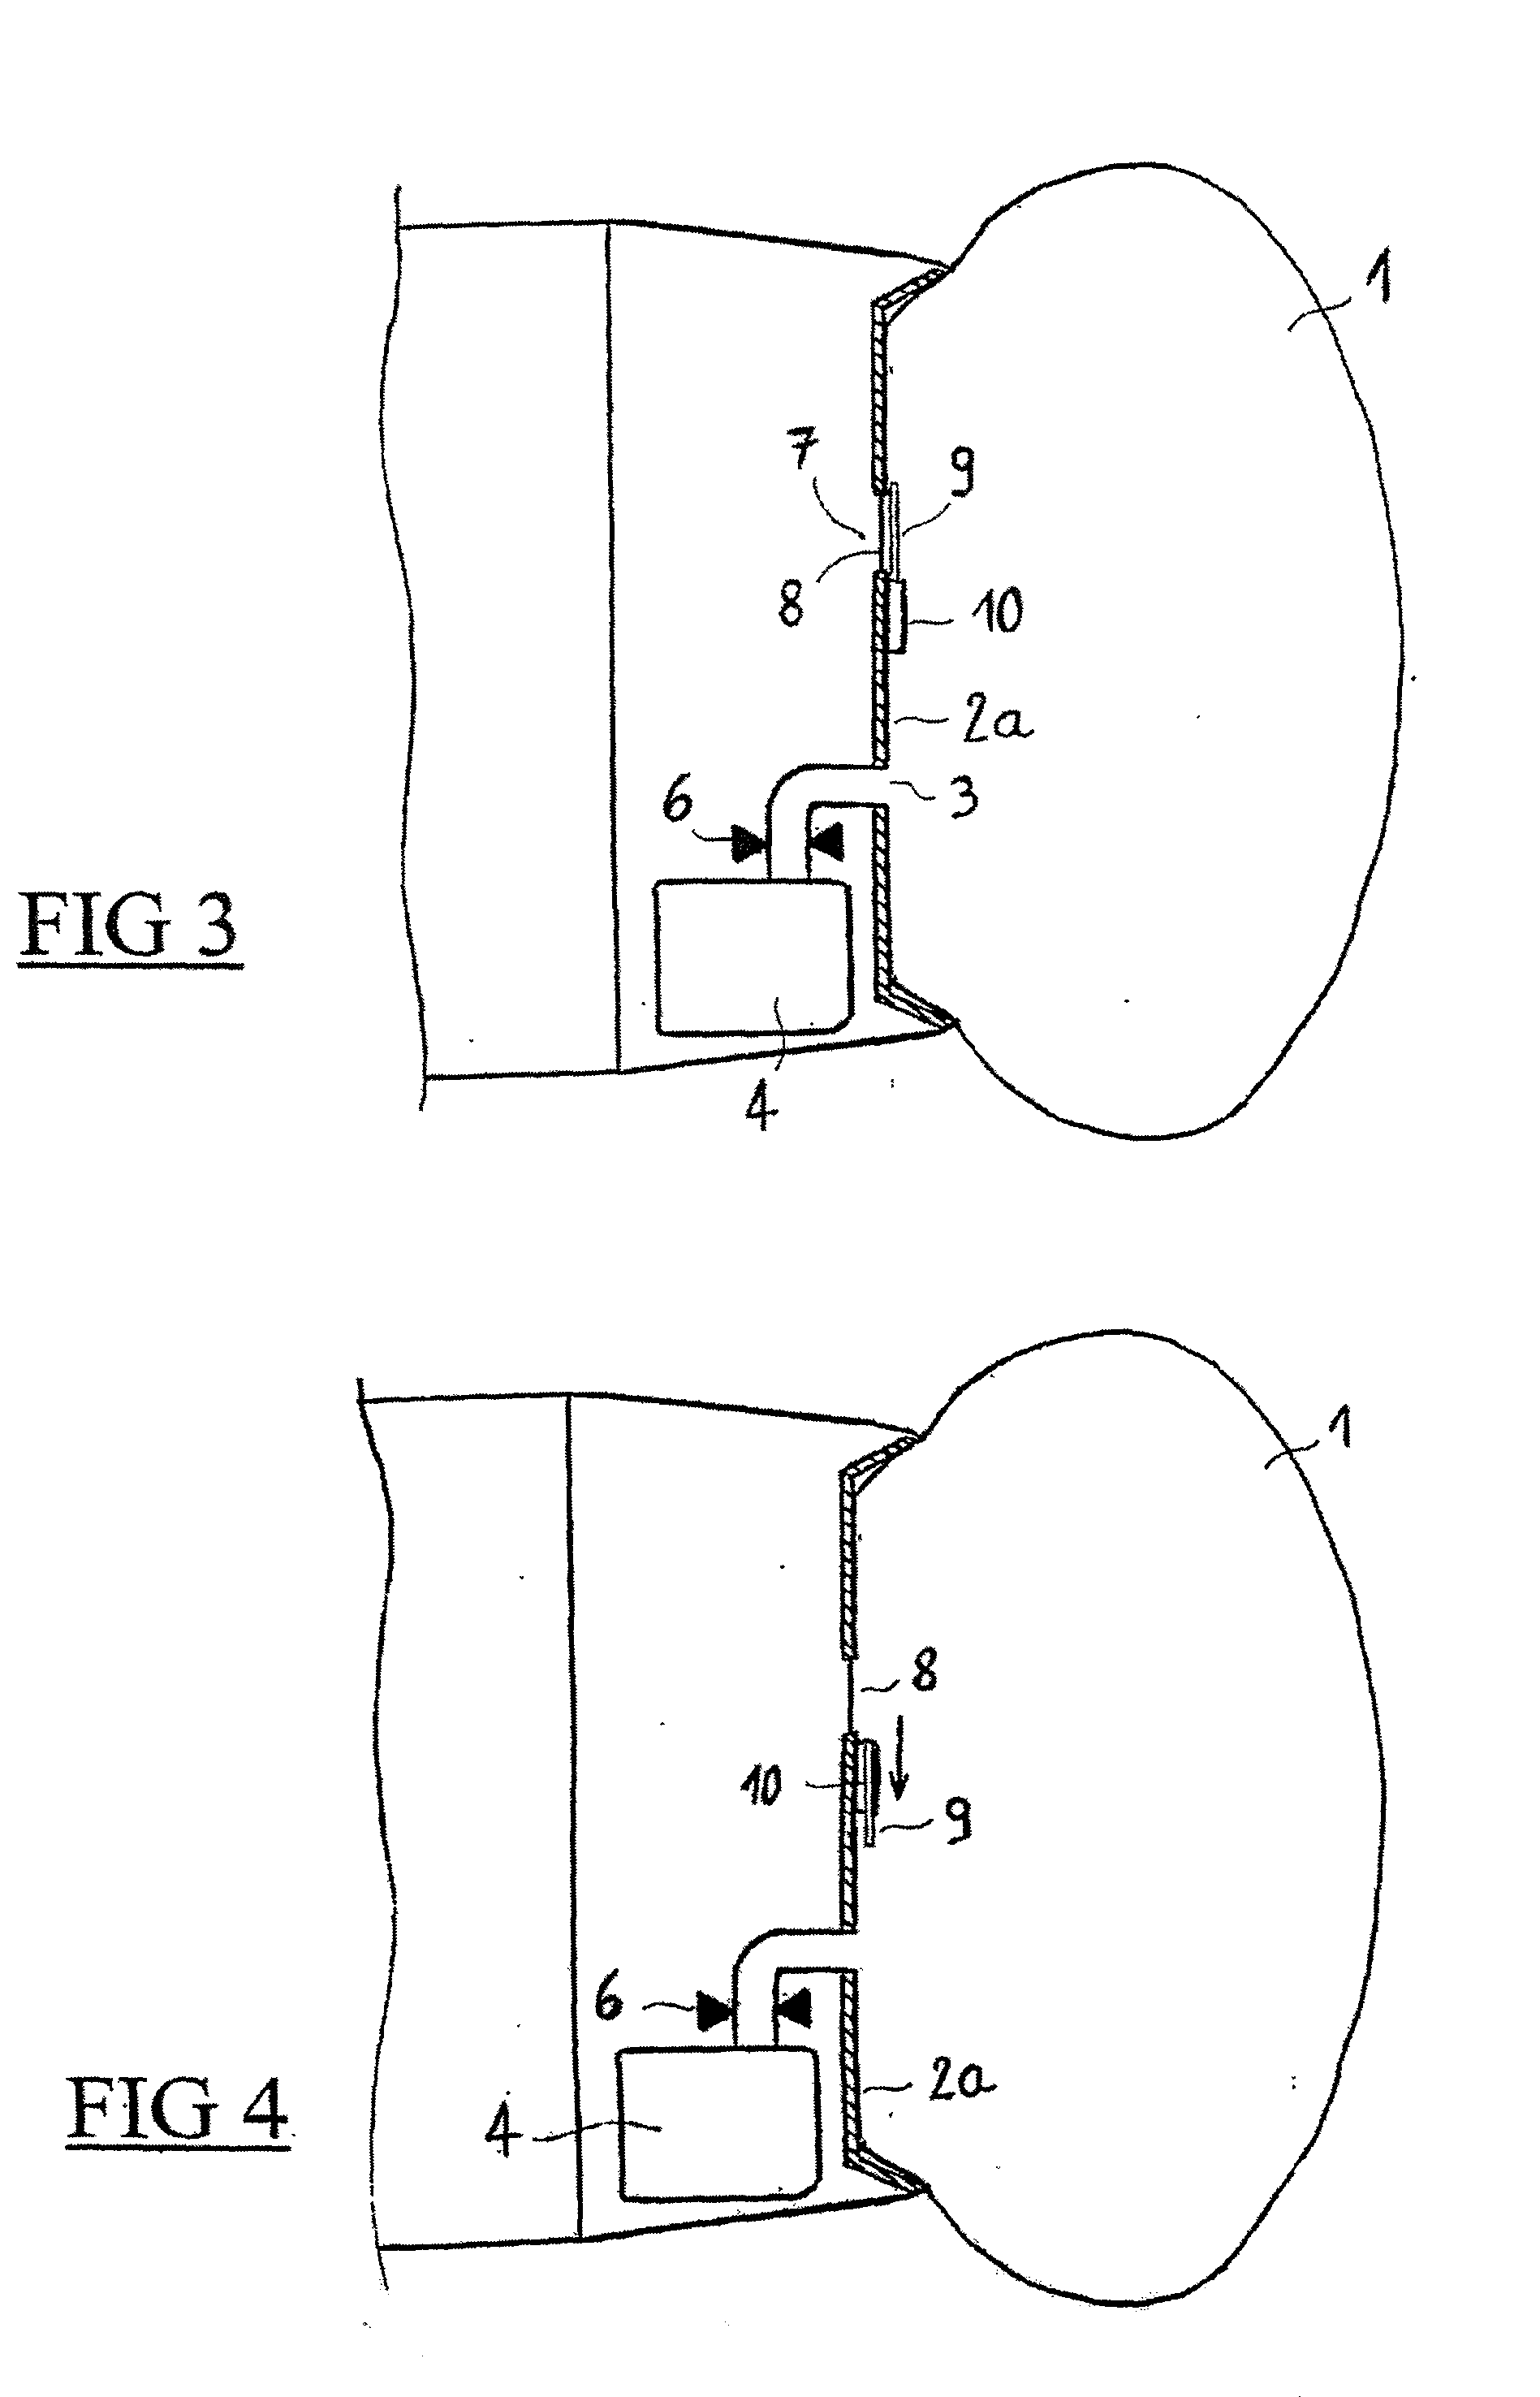 Release device for releasing an inflatable element and a protection device for providing impact protection to a vehicle fitted with such a release device